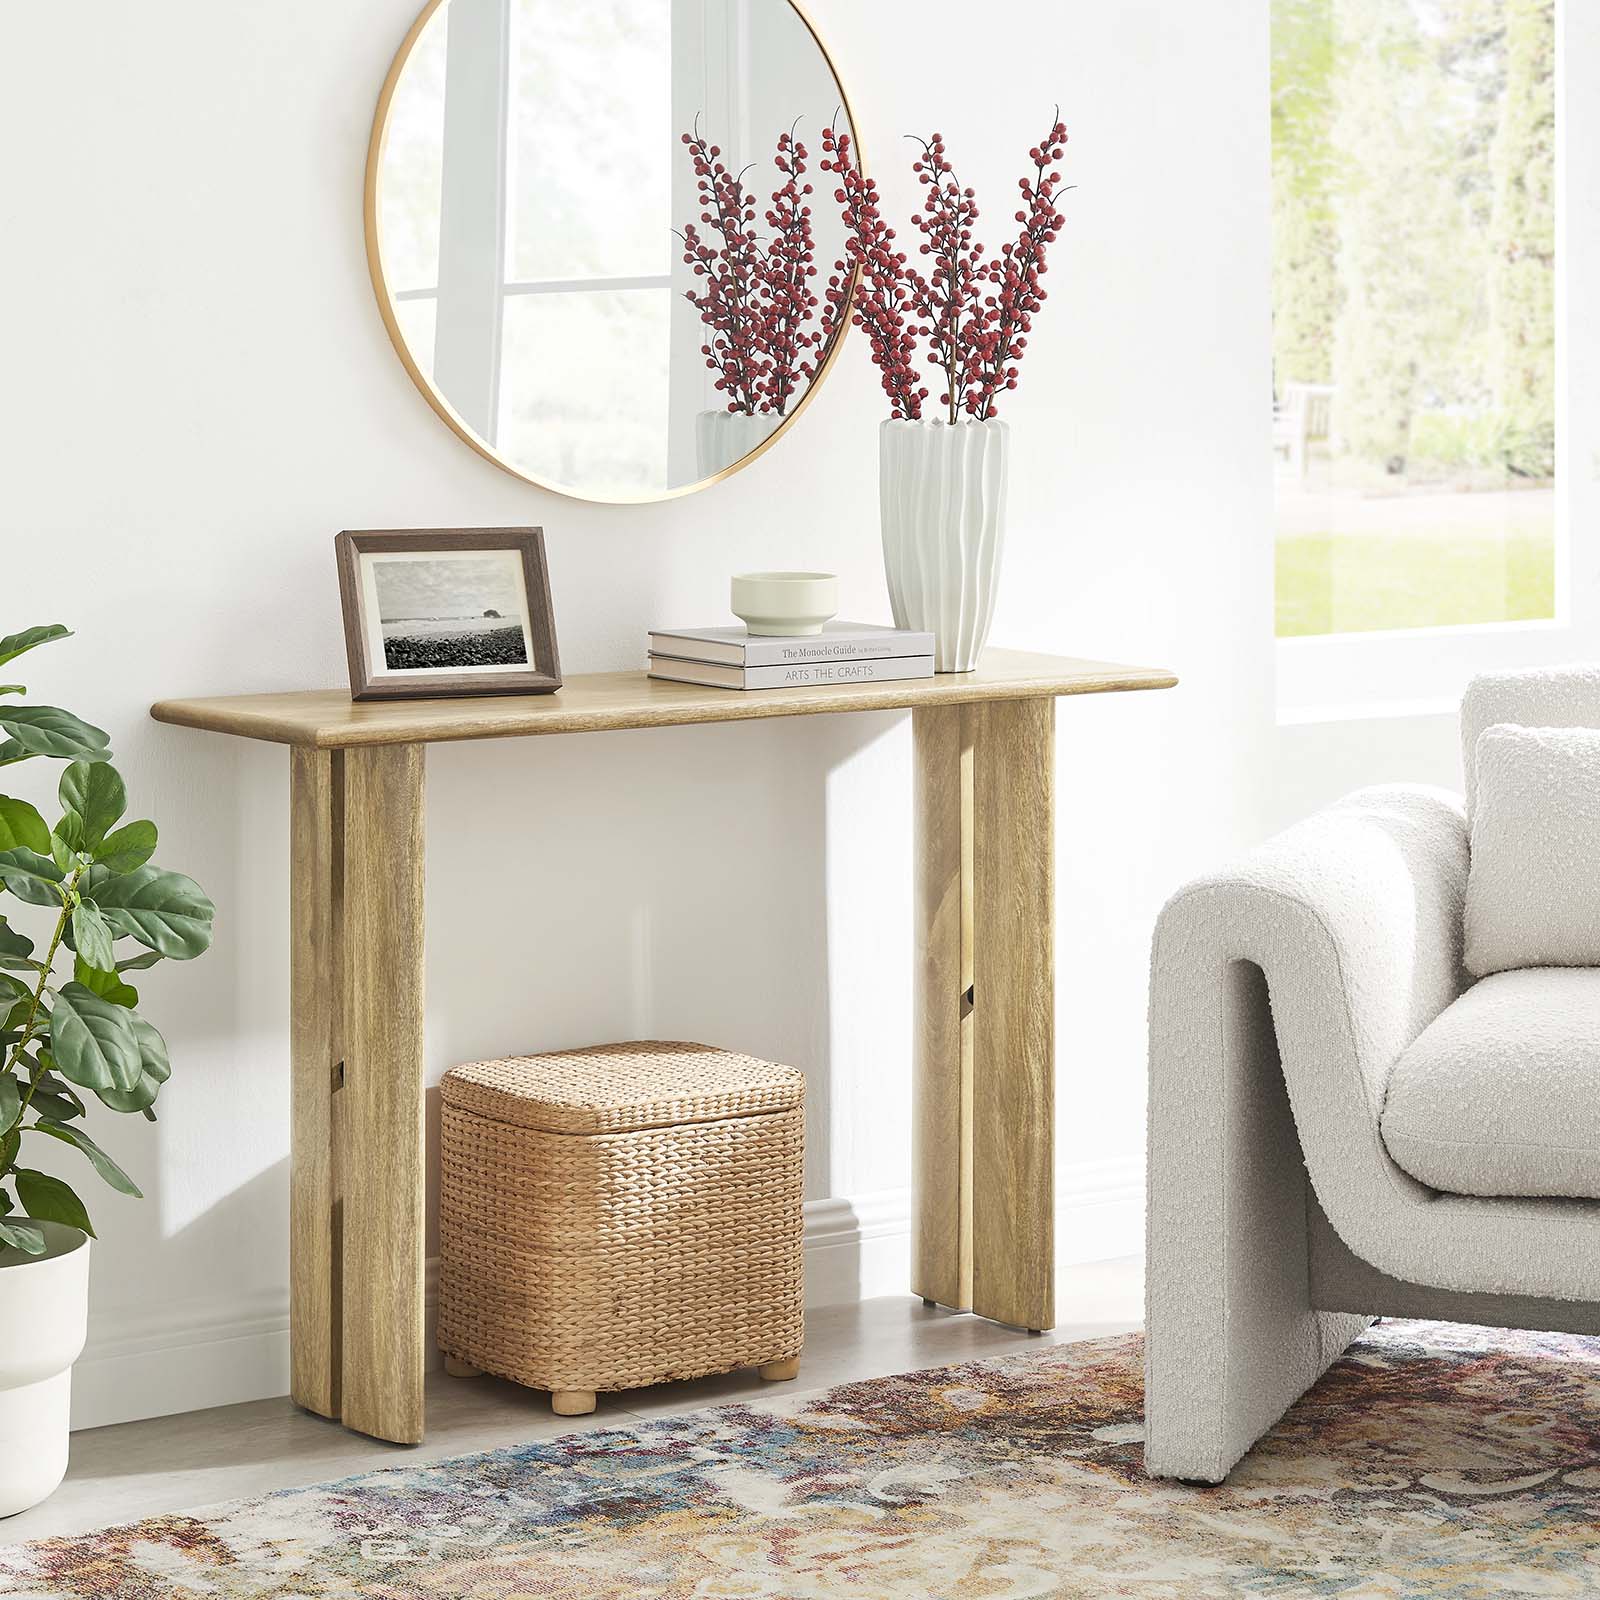 Amistad Wood Console Table - East Shore Modern Home Furnishings